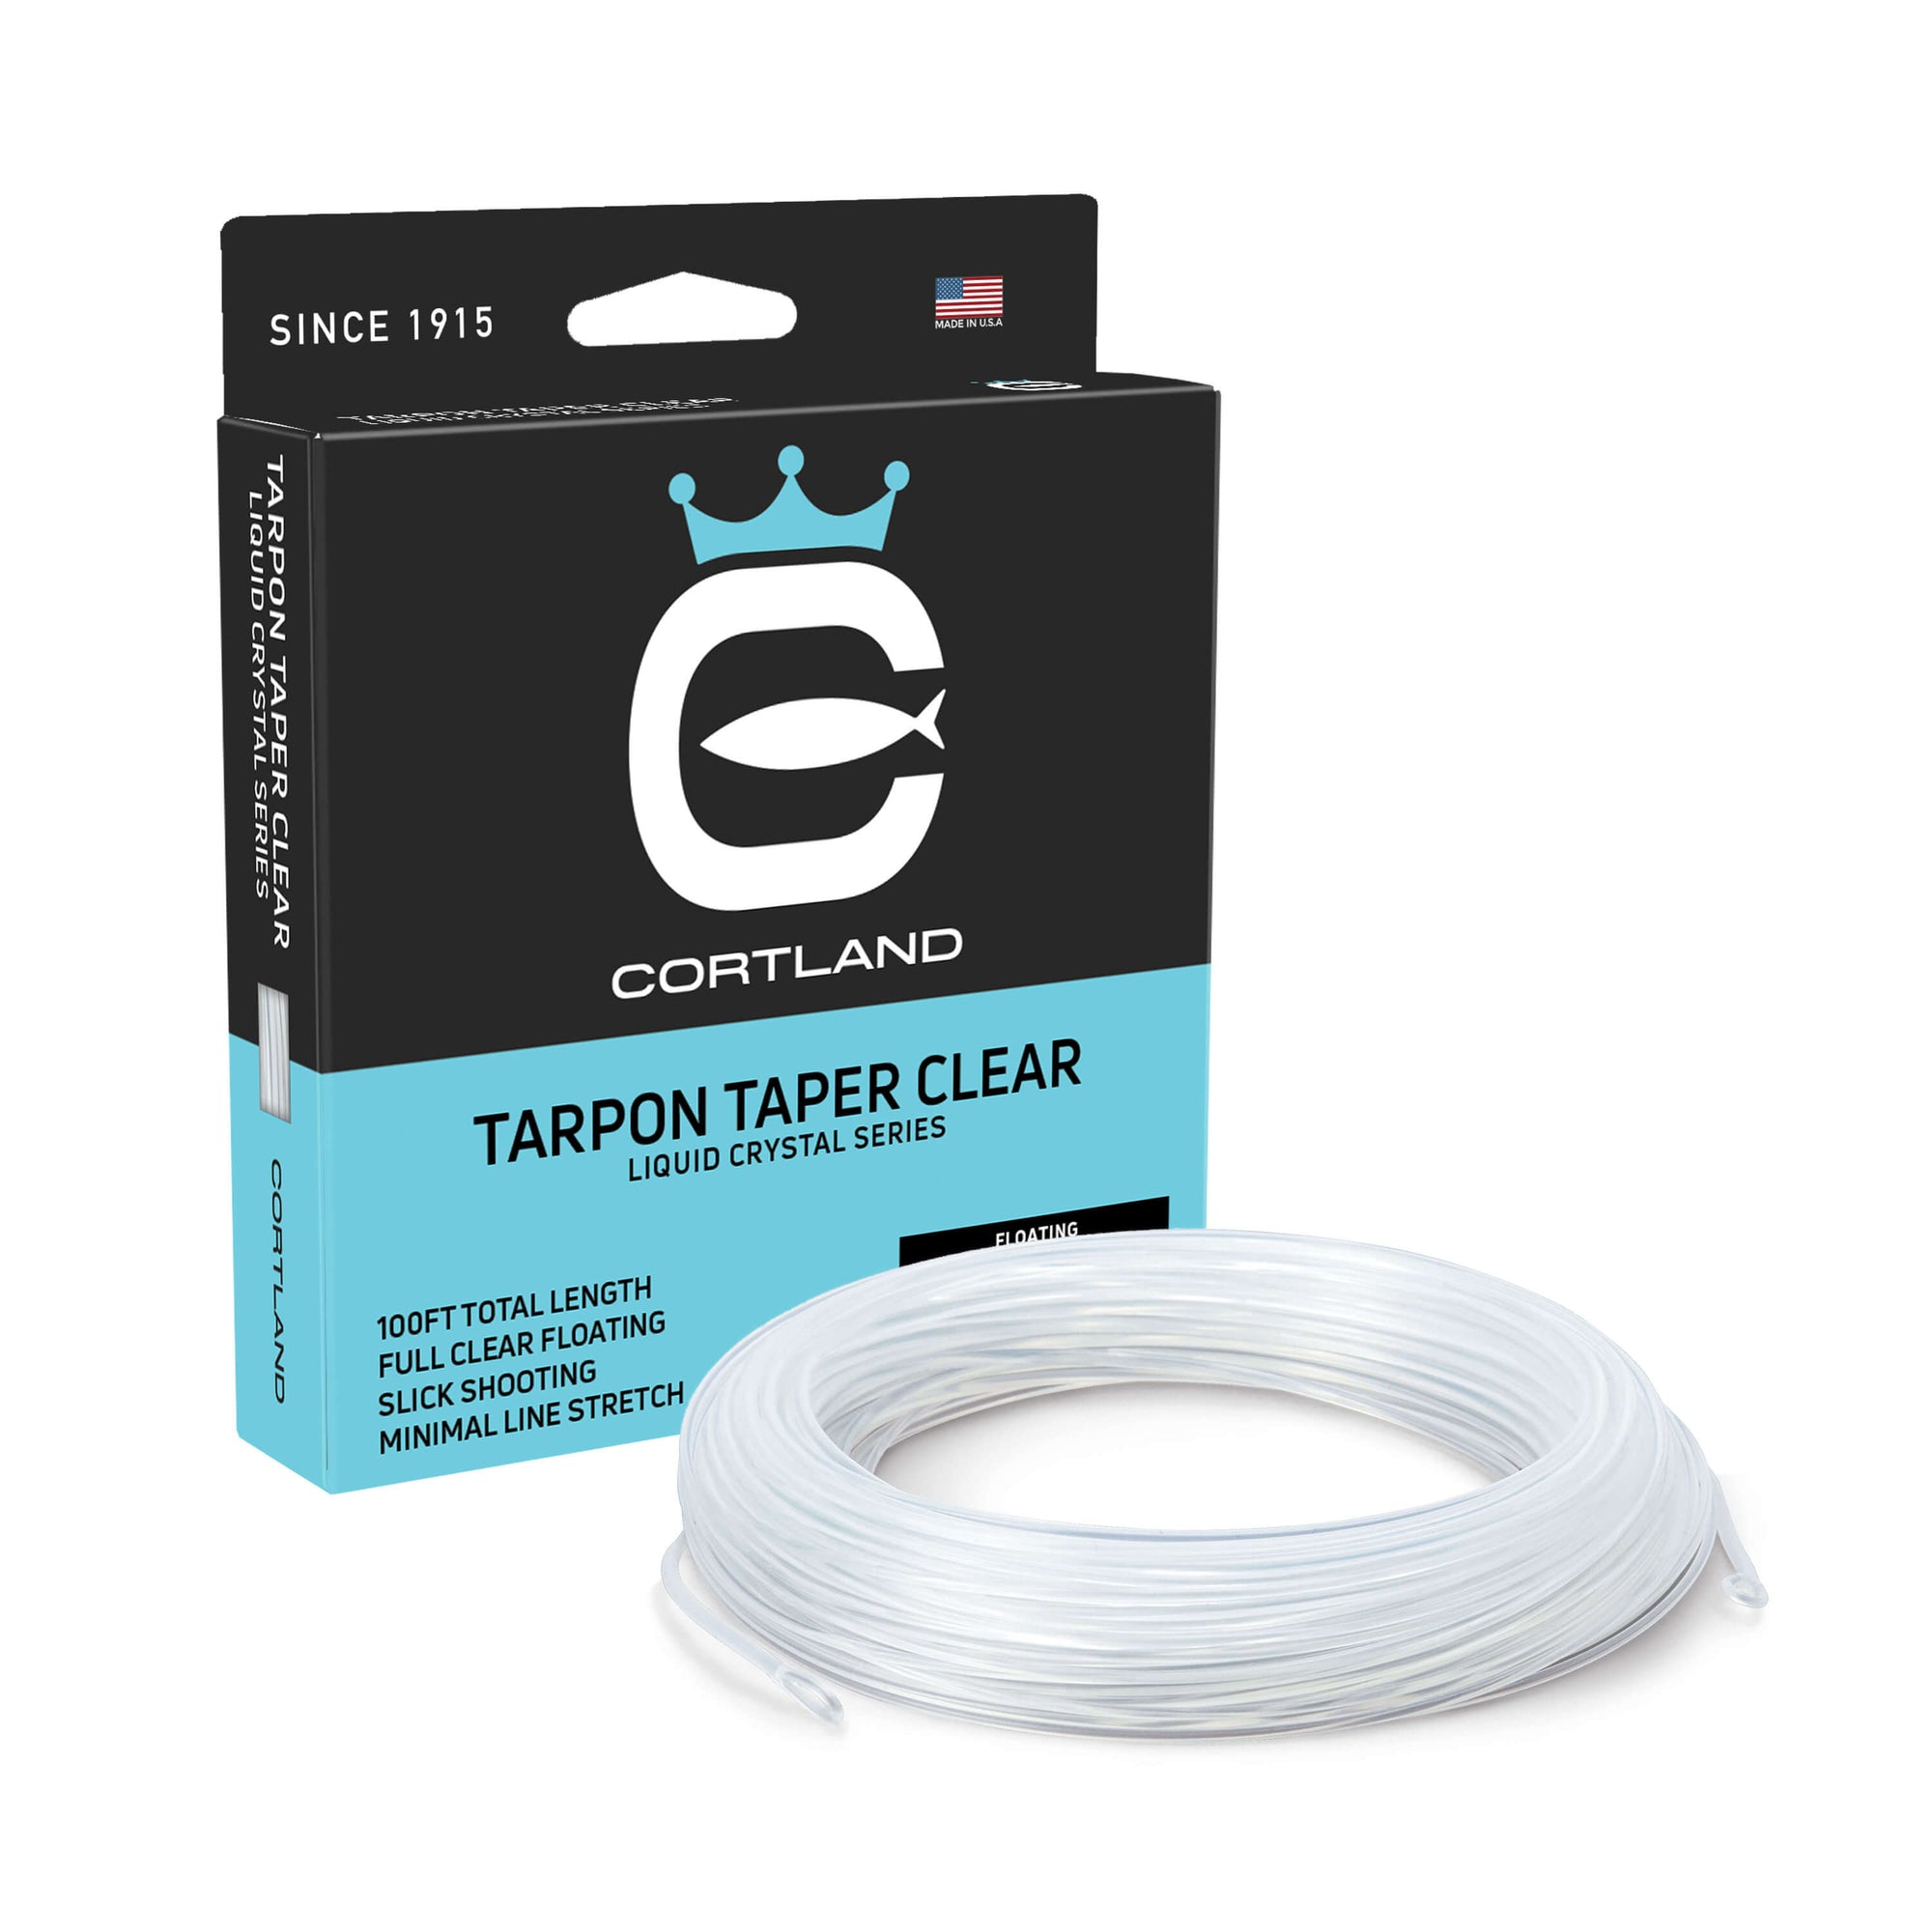 Tarpon Taper Clear Fly Fishing Line and Box. The fishing line is clear. The box is black at the top and light blue at the bottom. 